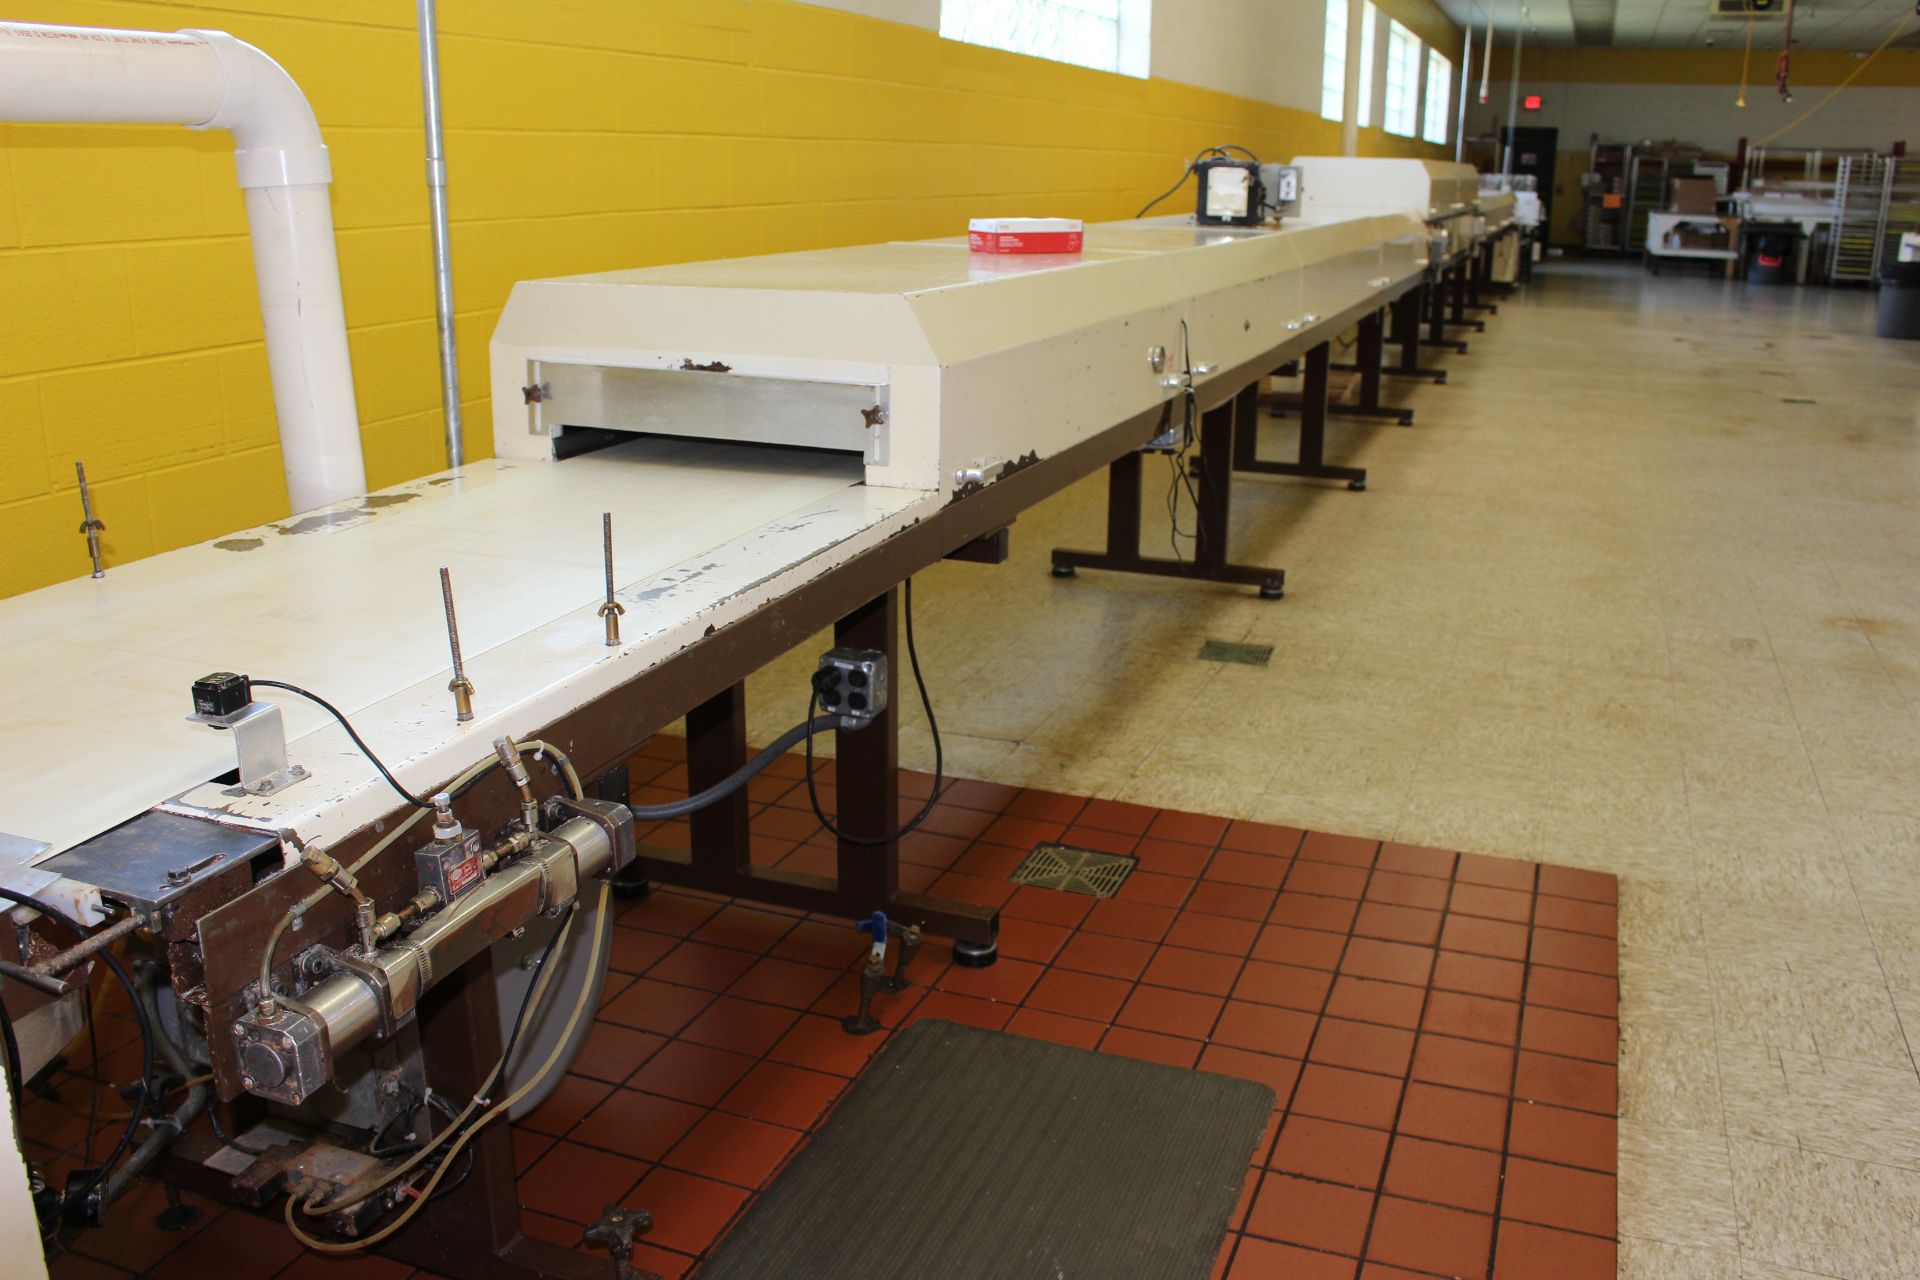 Nielsen 20" Double Enrobing Line with 6-ft long wire mesh infeed conveyor, Enrober with flow pan, - Image 8 of 14